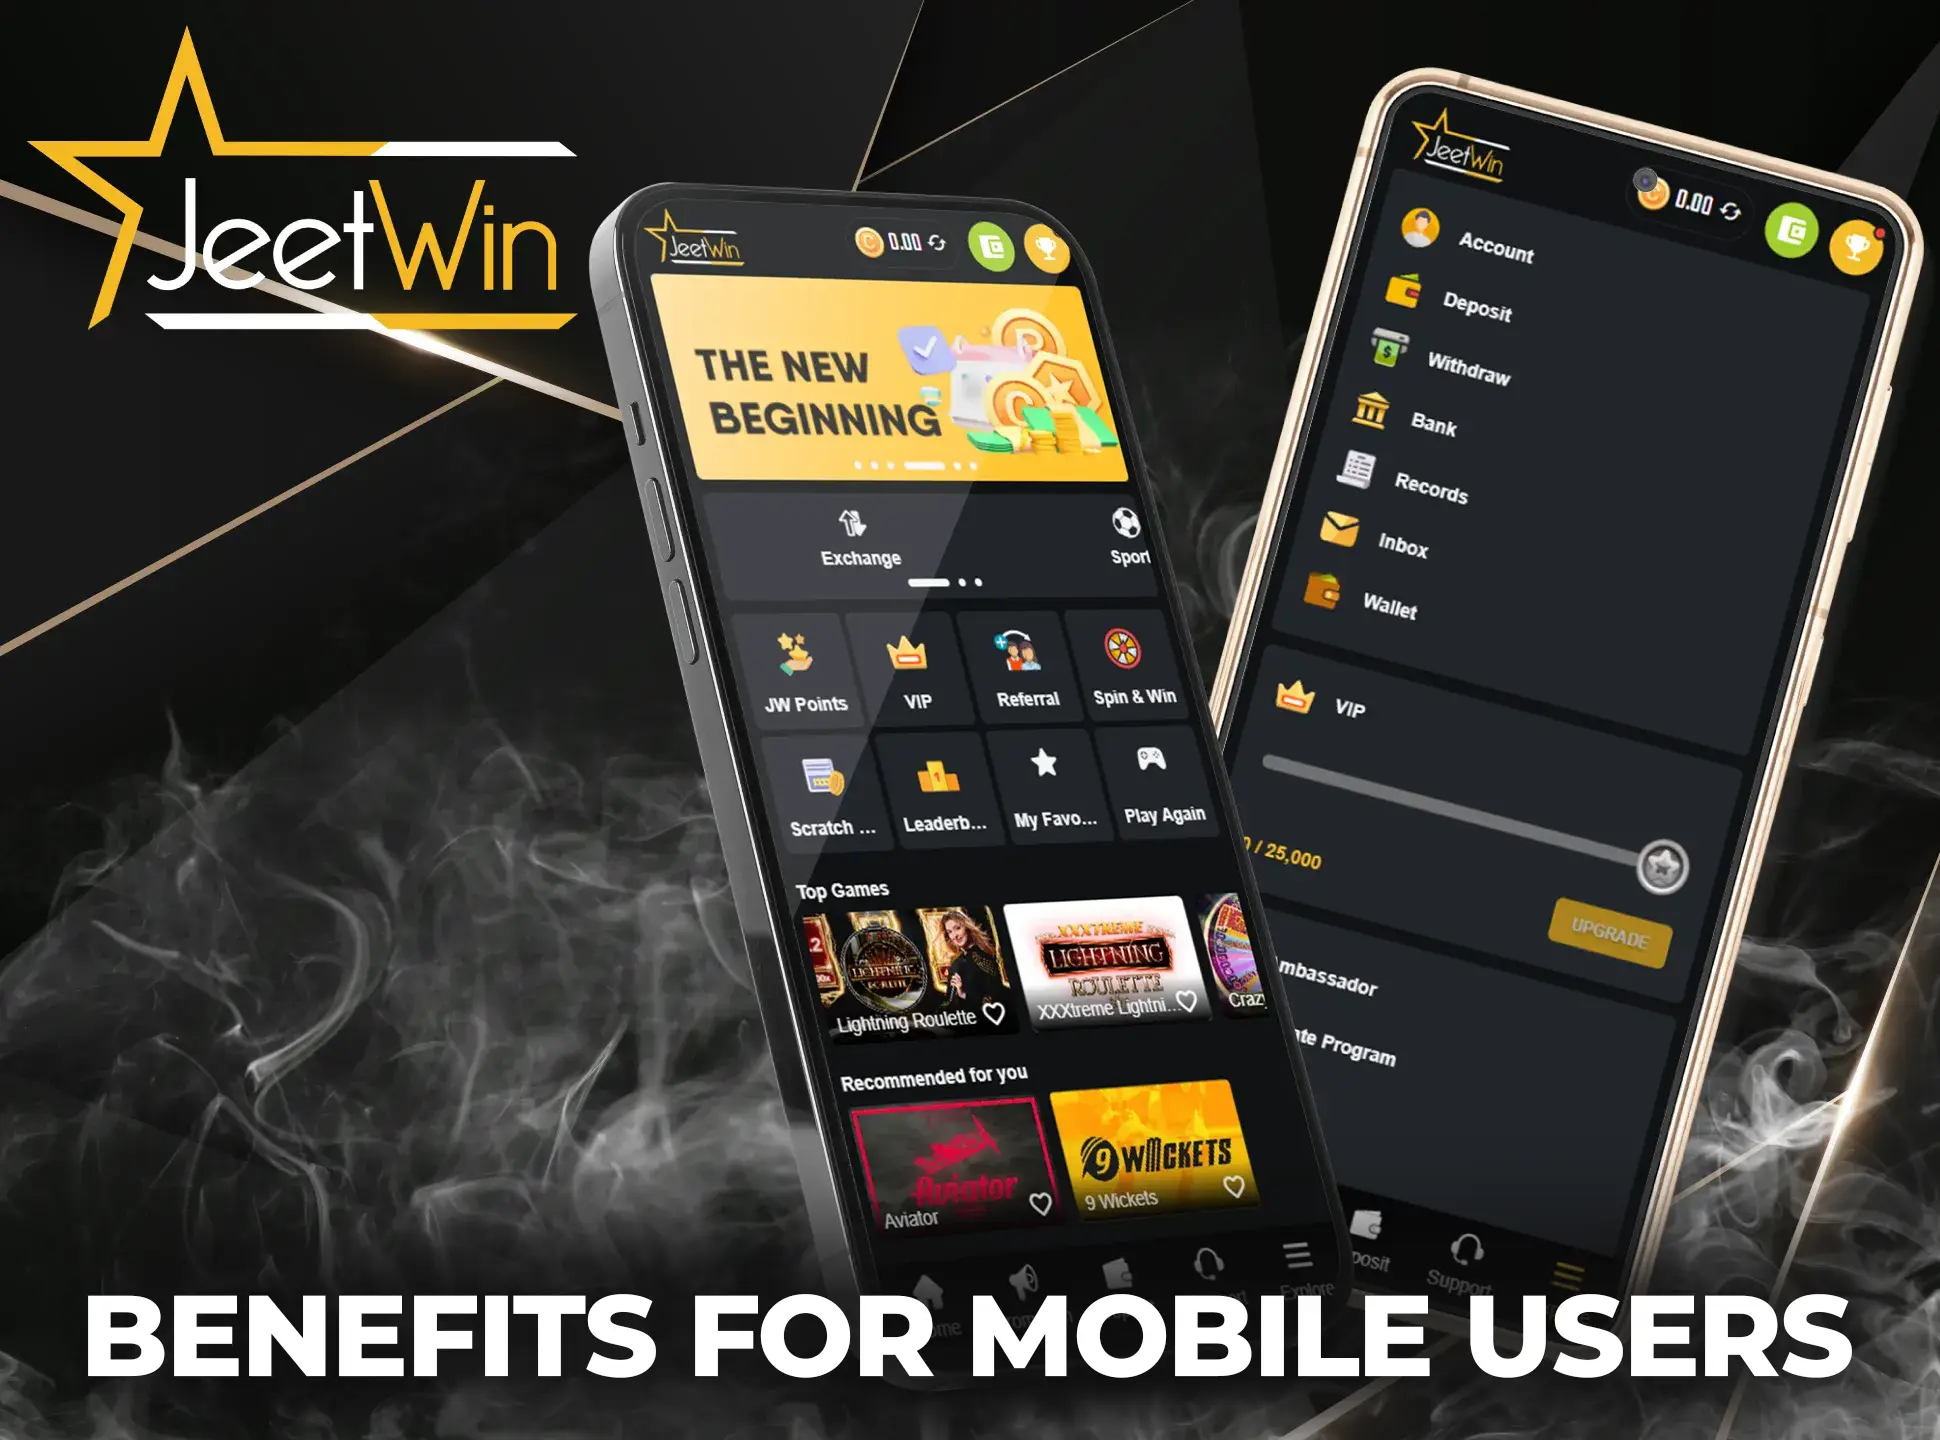 Check out the main benefits that make JeetWin attractive to players.